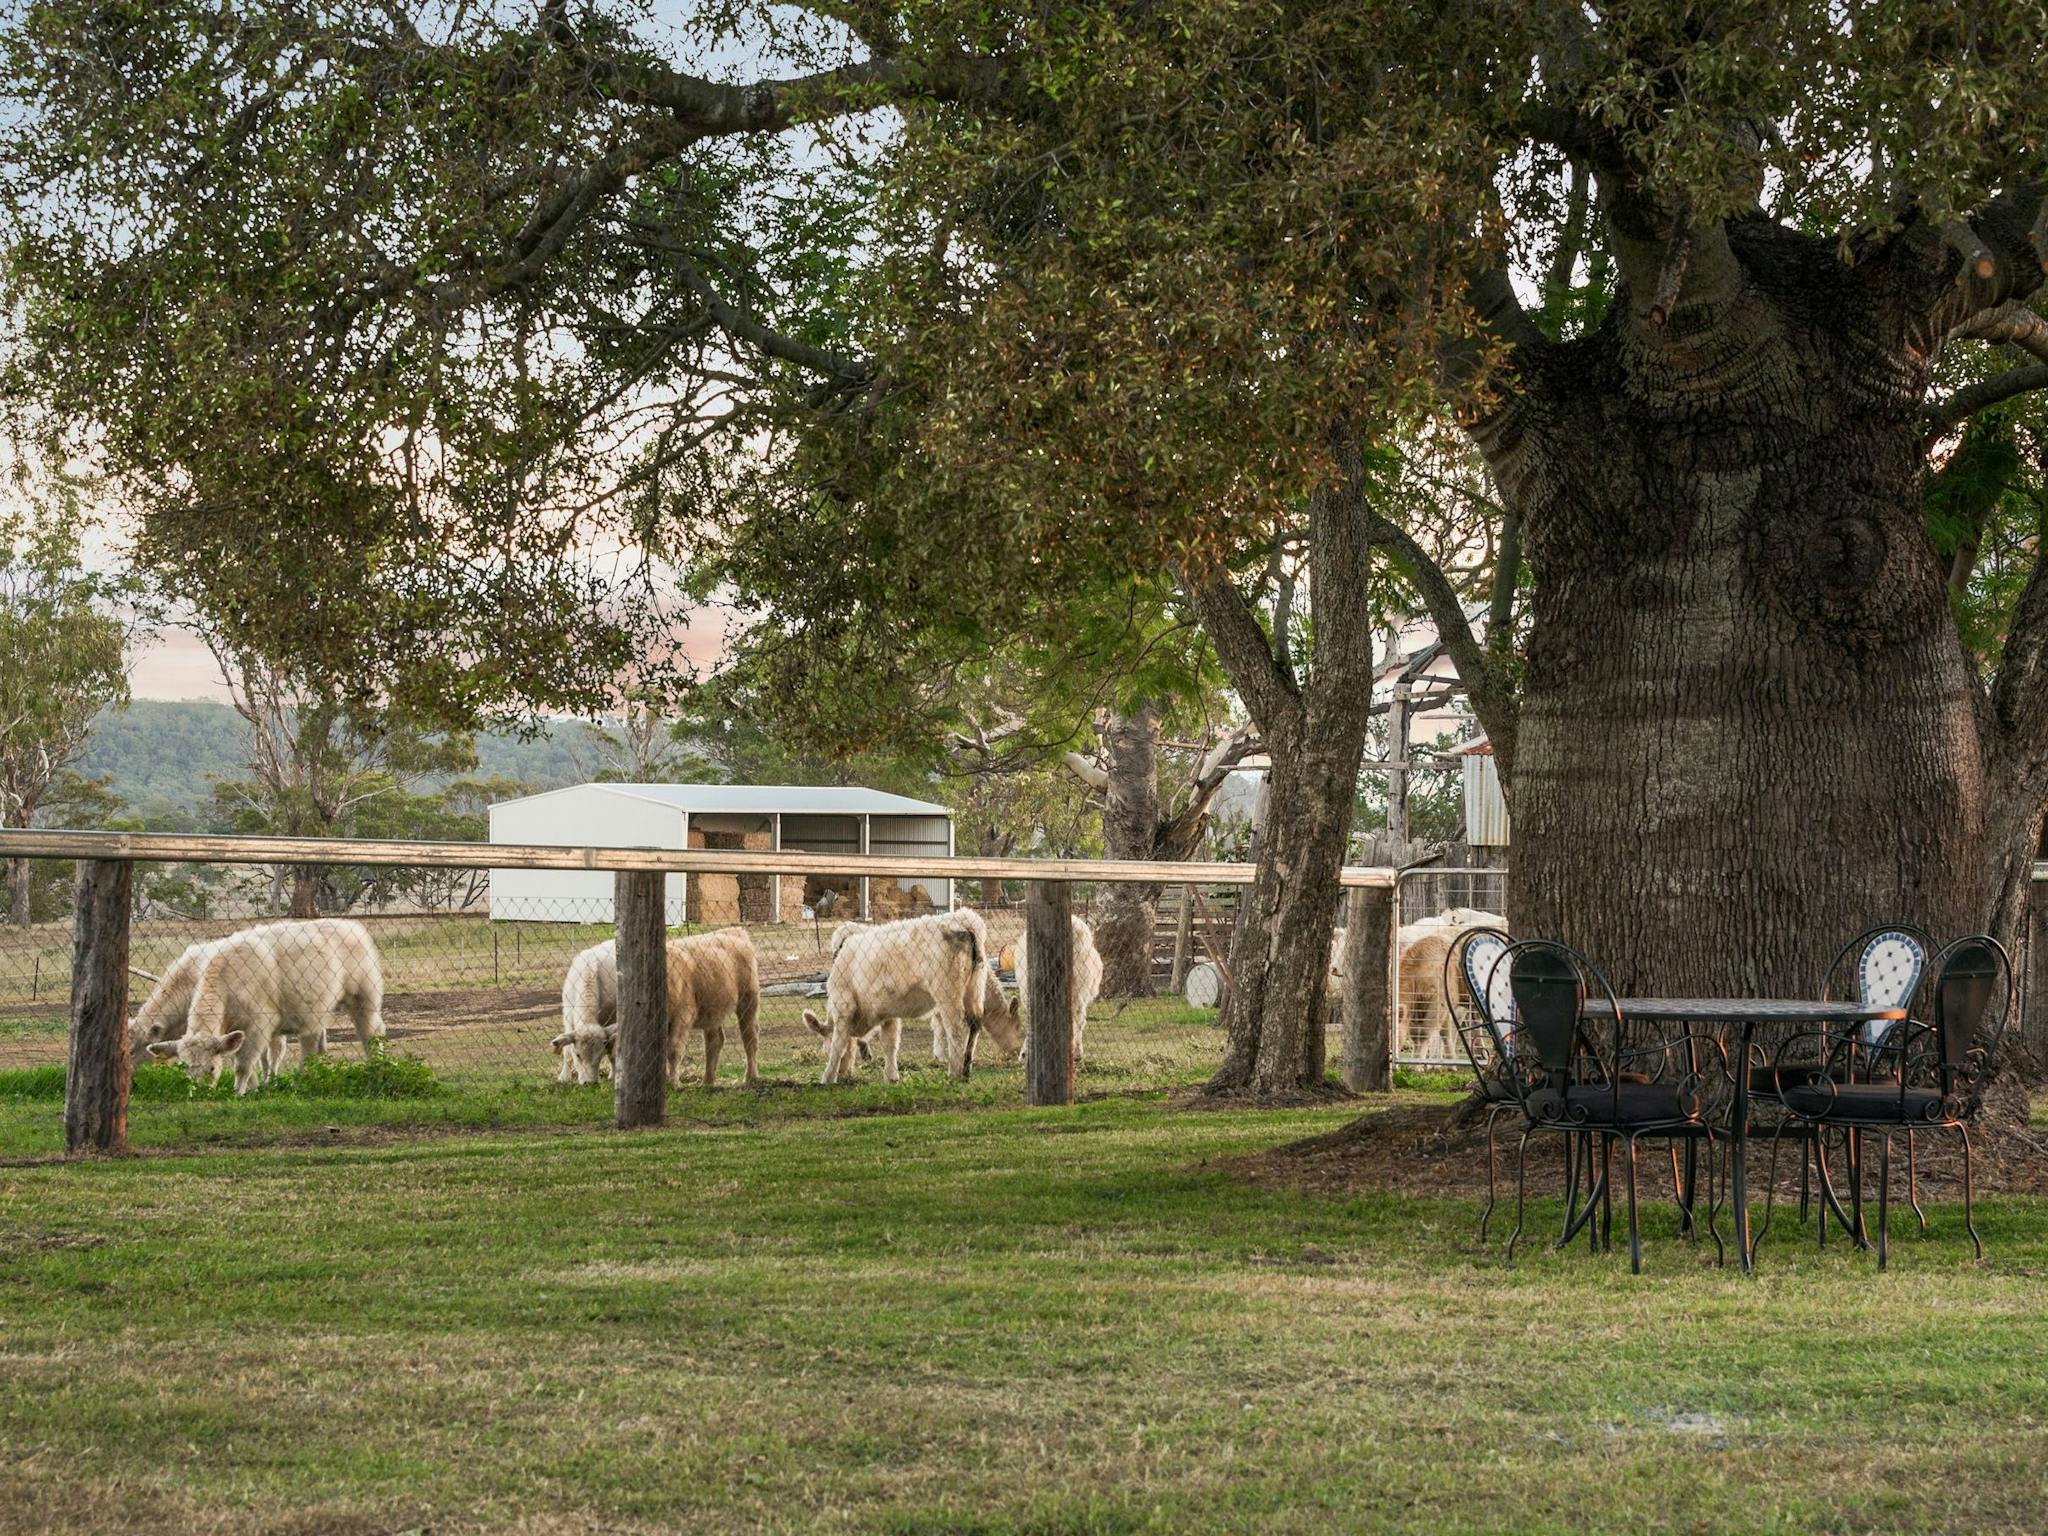 Mountview Homestead is situated on a 650 acre working cattle farm.